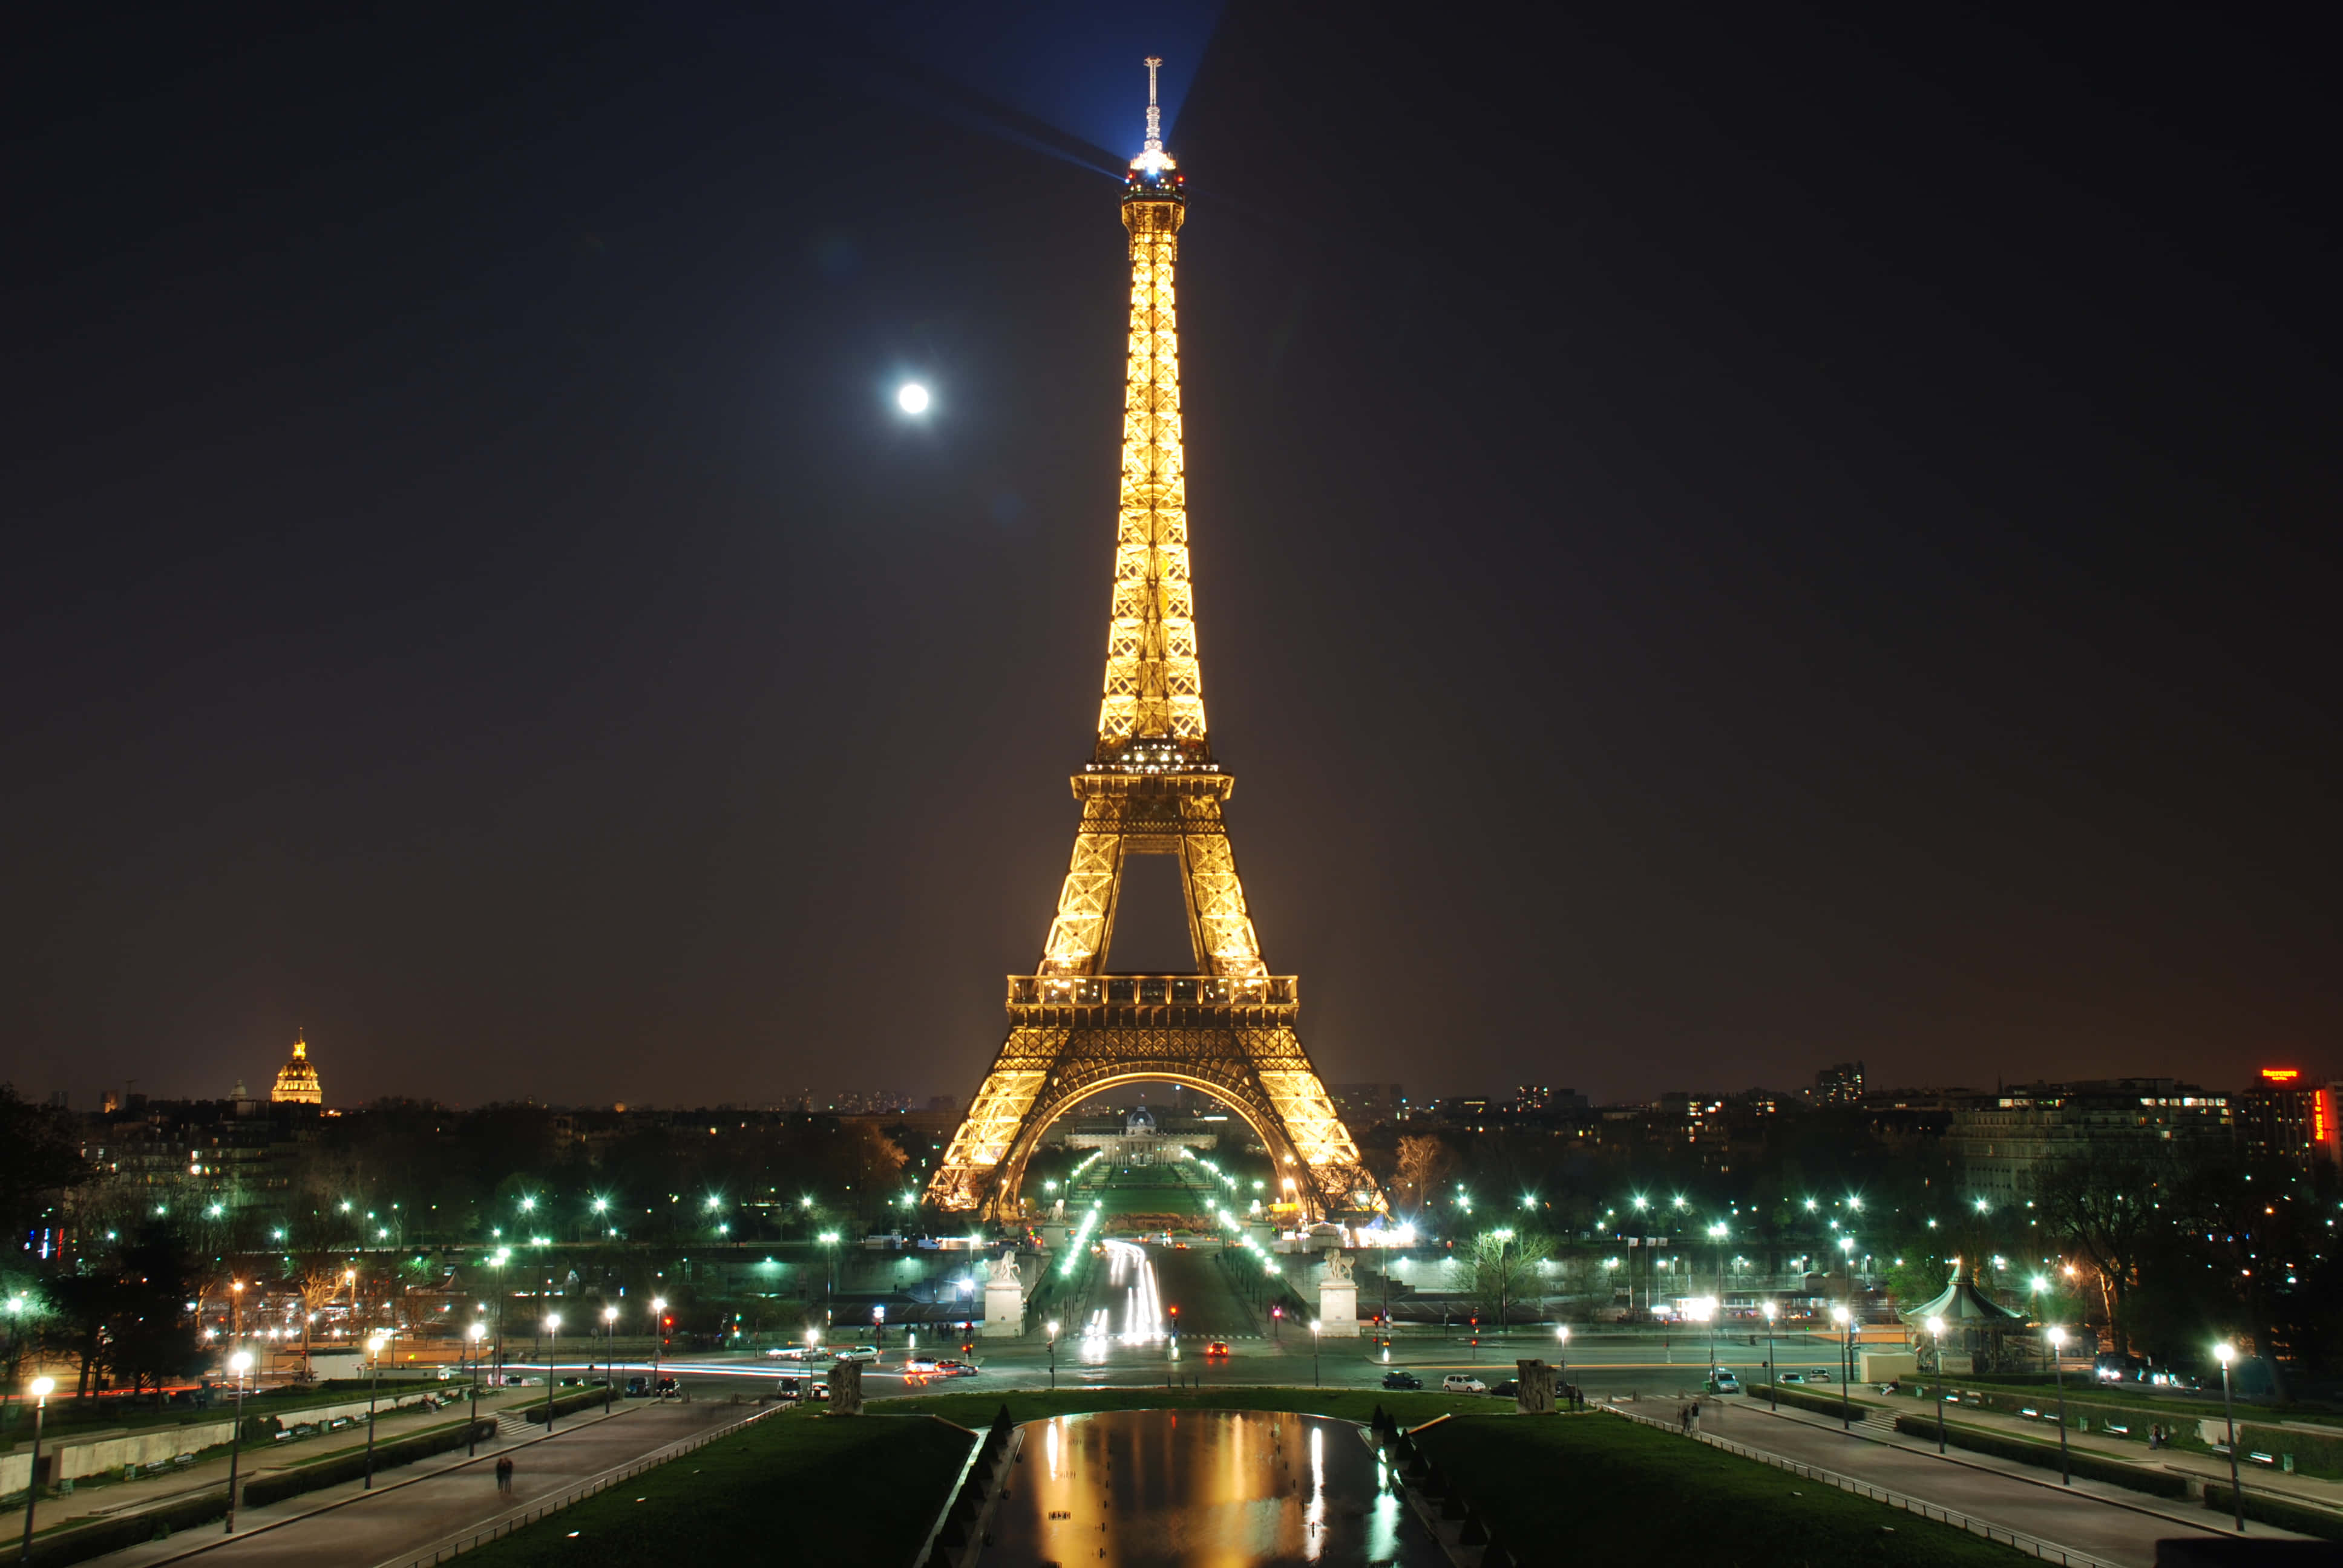 A night of romance and sparkles from the magnificent Eiffel Tower